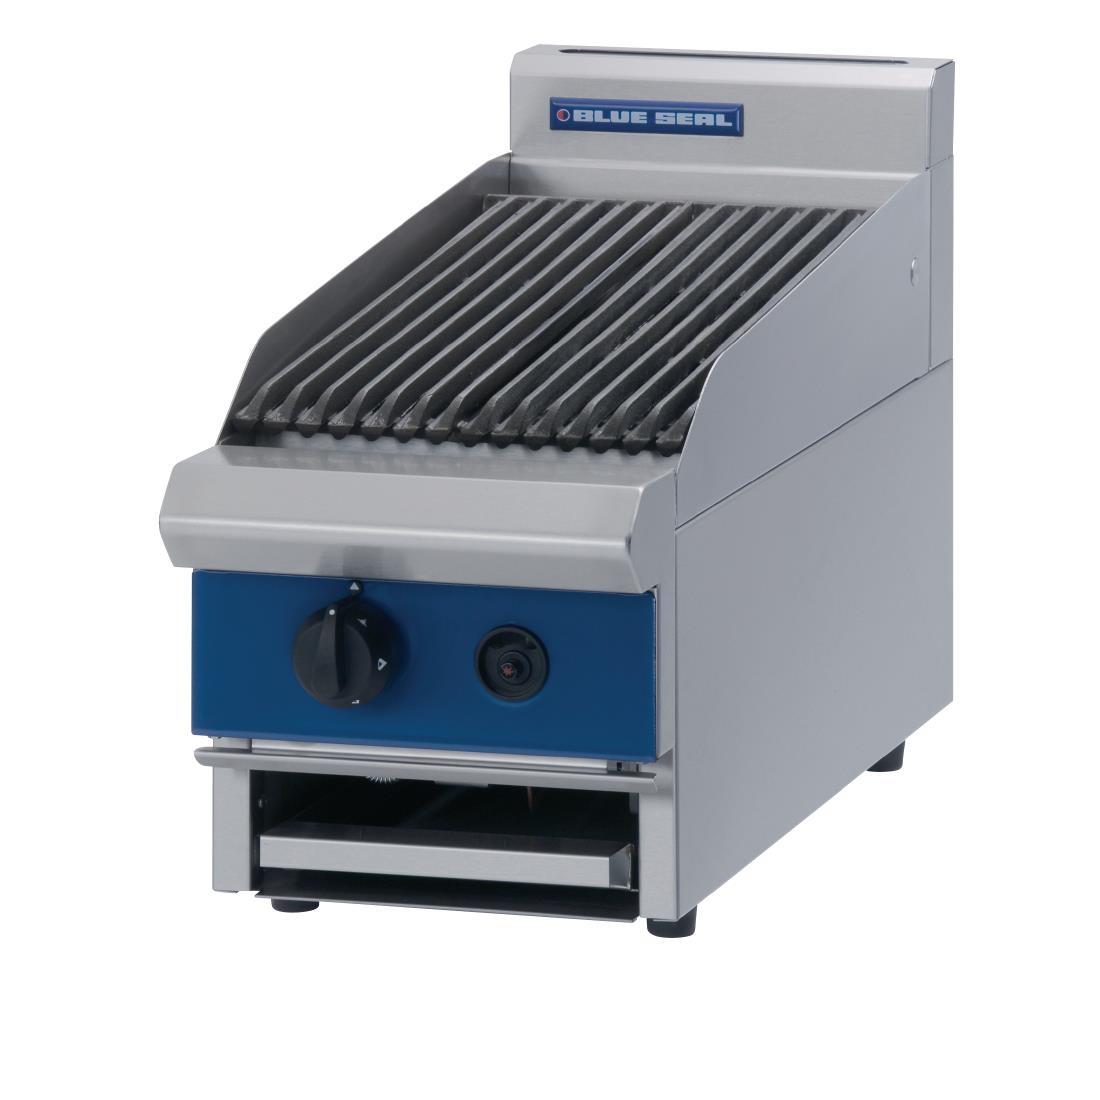 Blue Seal Chargrill Natural Gas G592BL - GK579-N  - 1